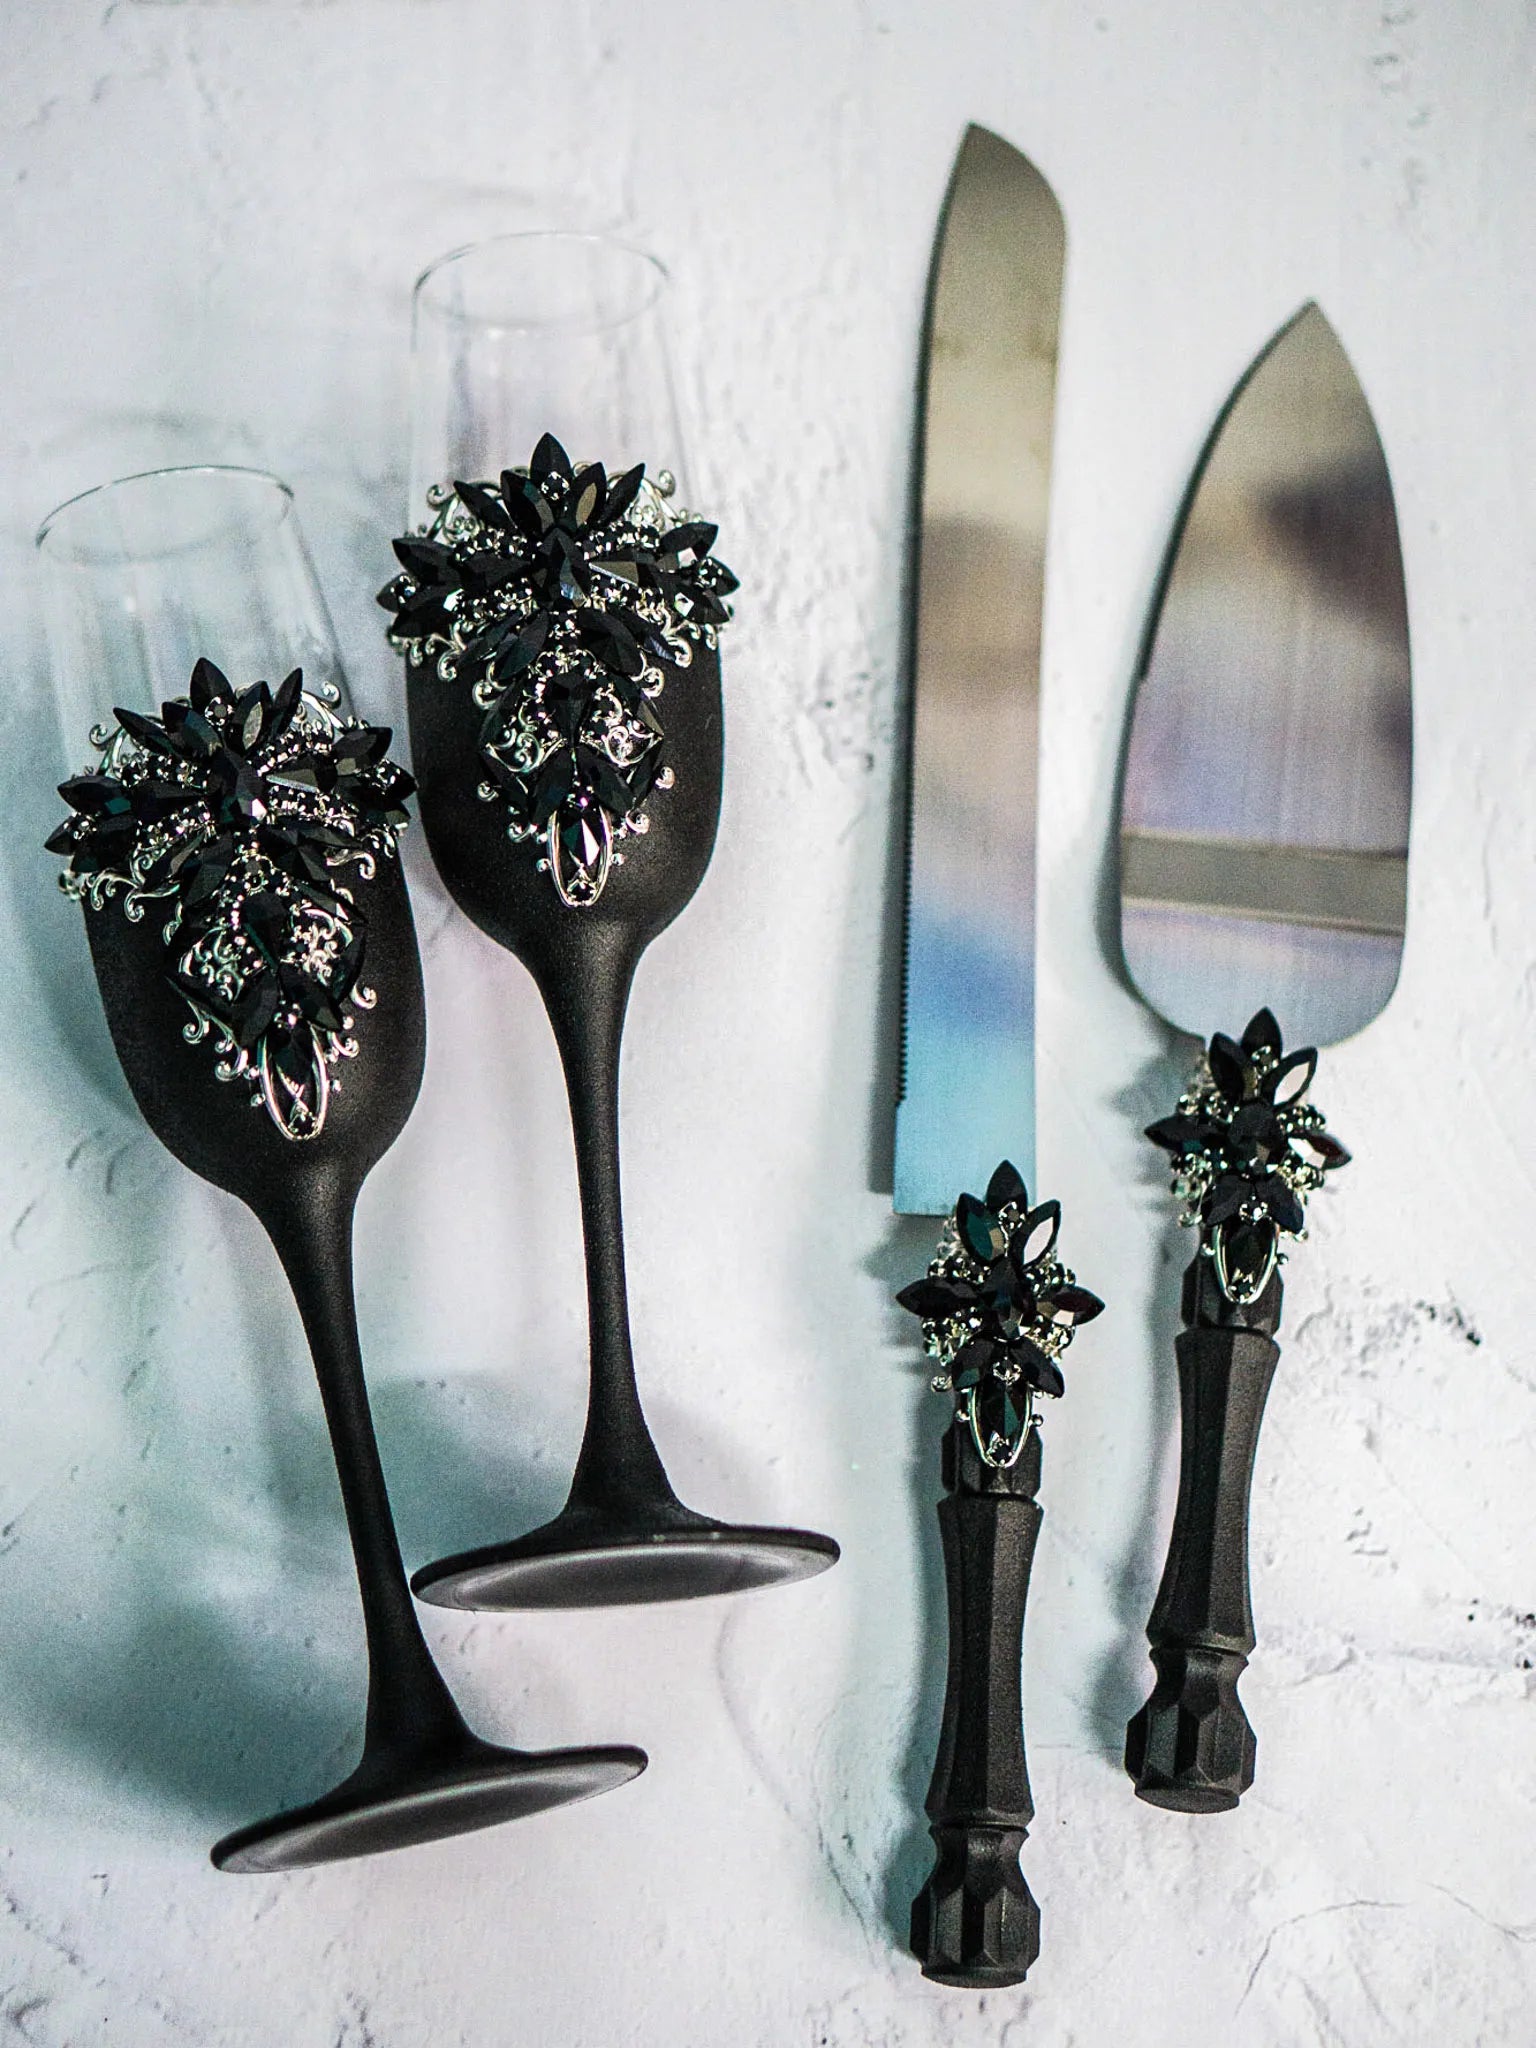 Black and silver crystal cake cutter set